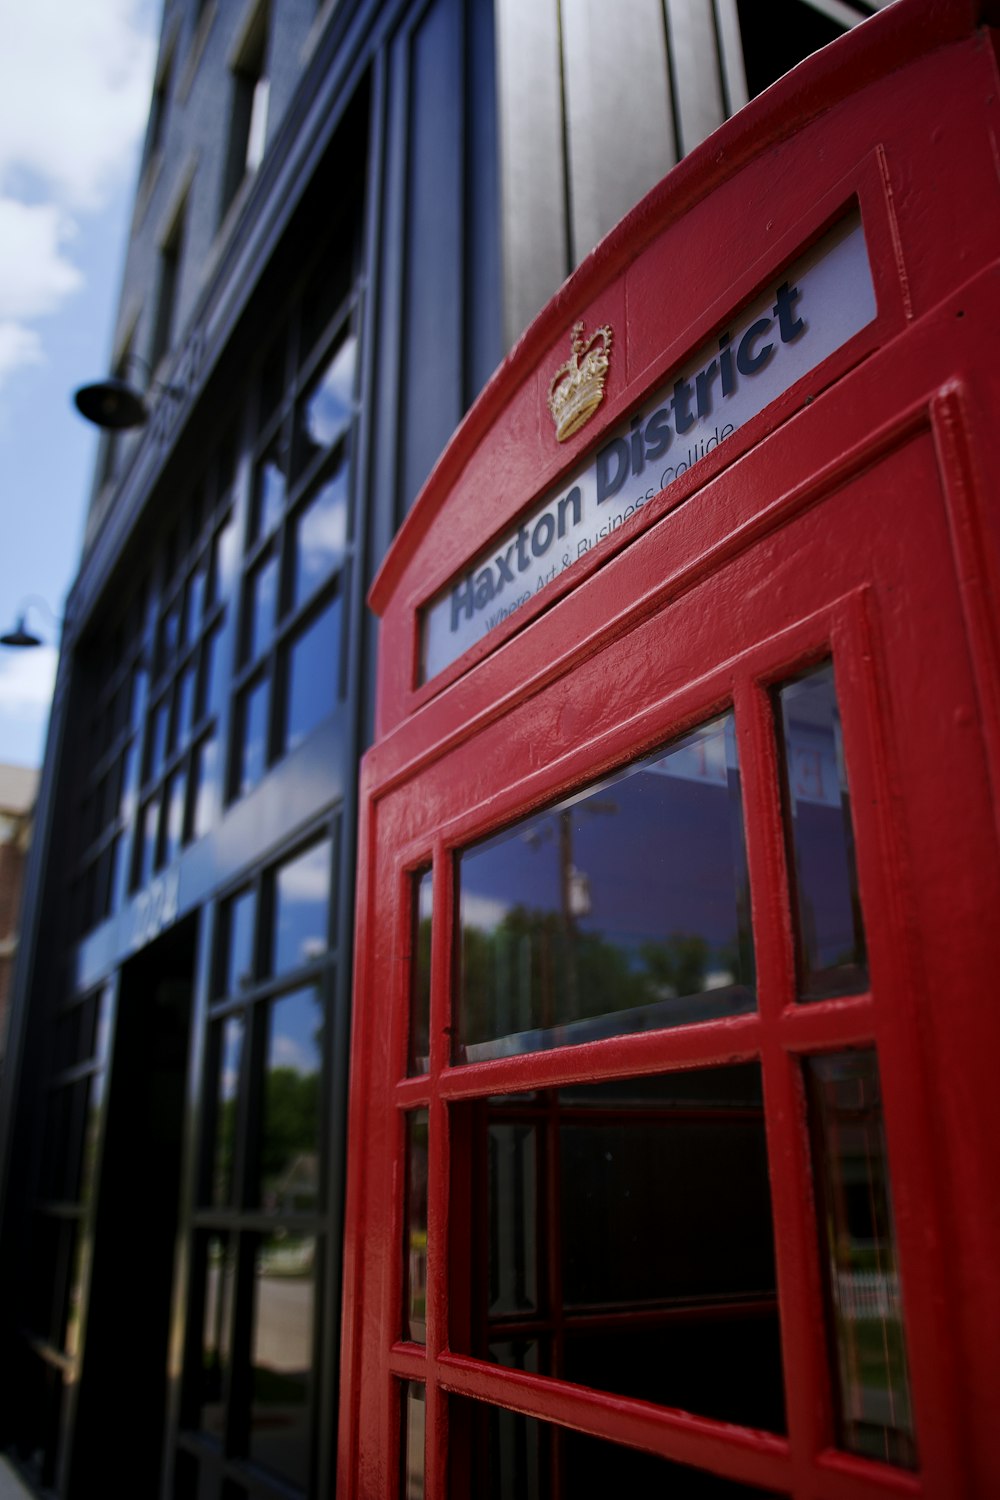 a red telephone booth in front of a building